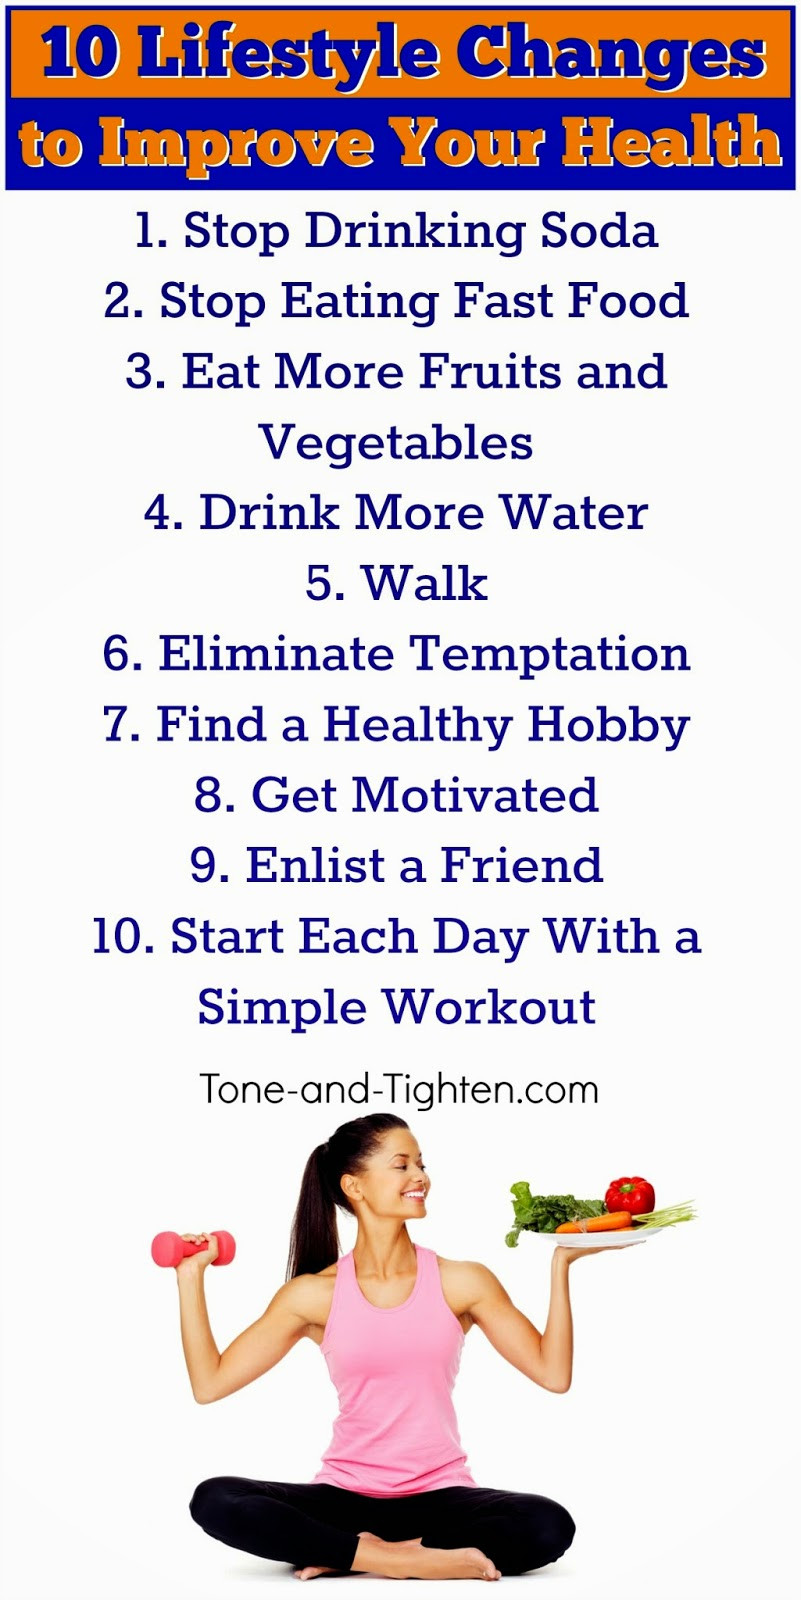 How To Lose Weight Healthy
 10 easy lifestyle changes to help you improve your health